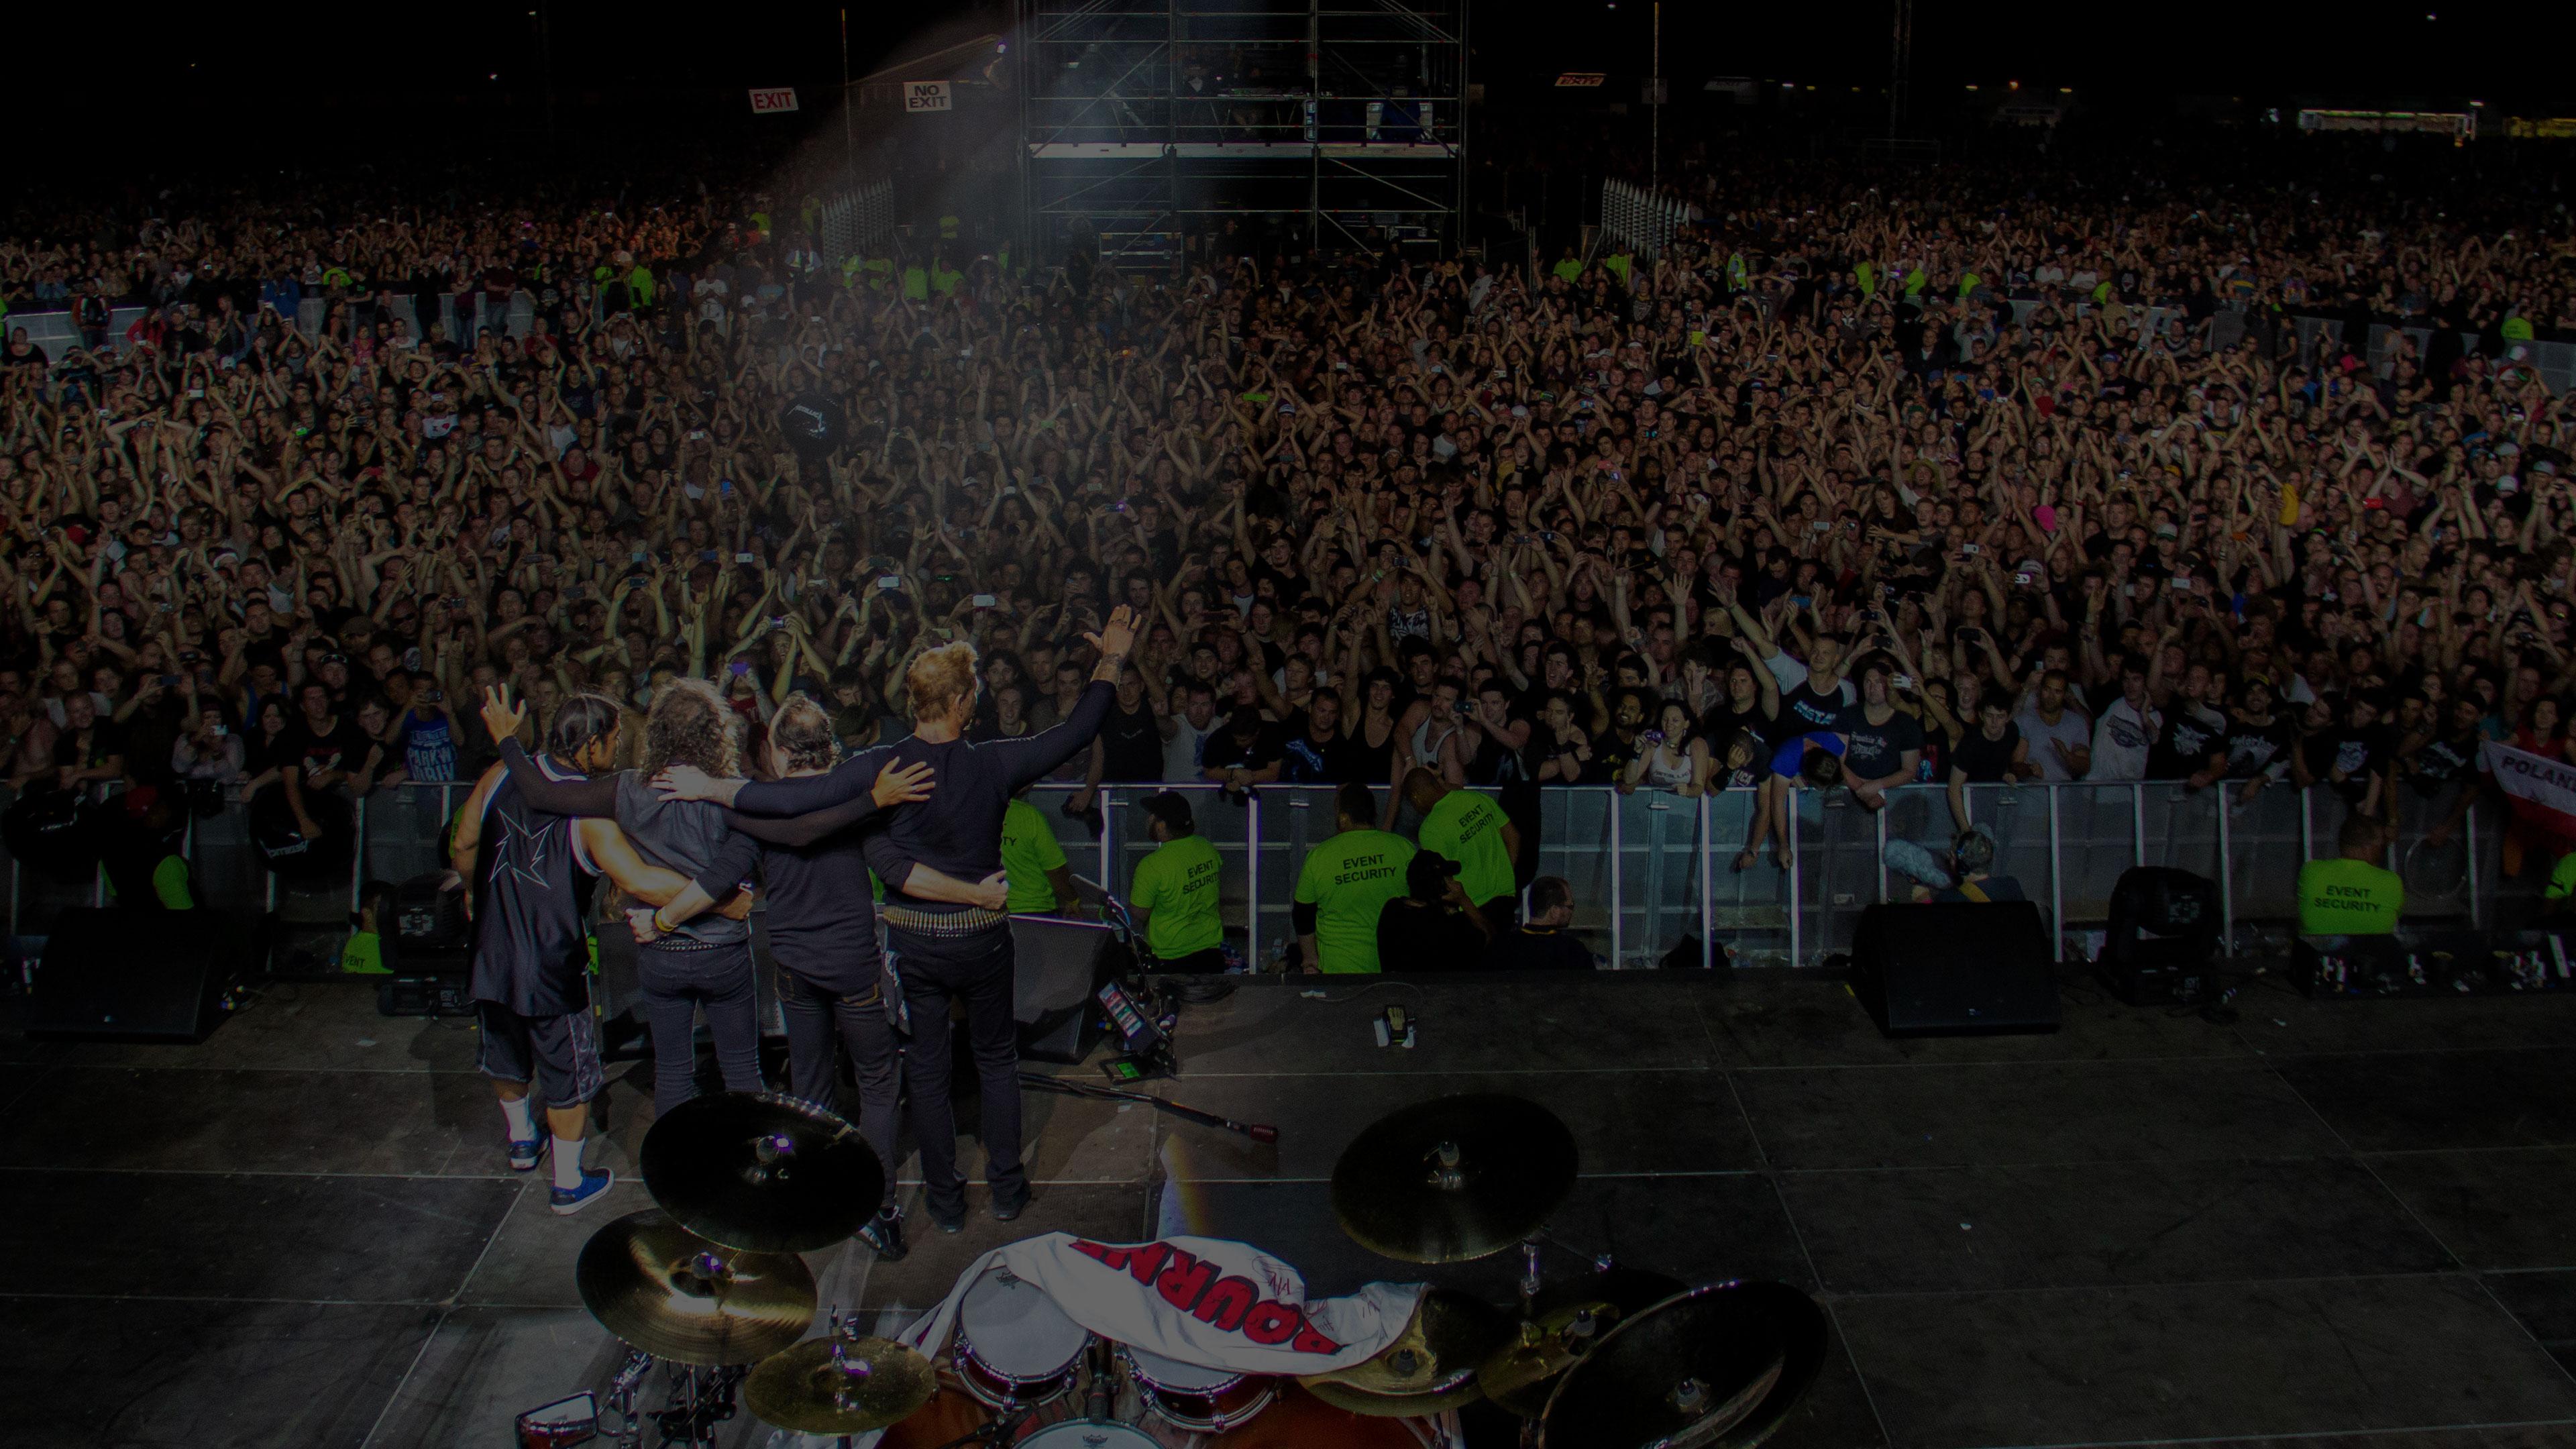 Banner Image for the photo gallery from the gig in Melbourne, Australia shot on March 1, 2013